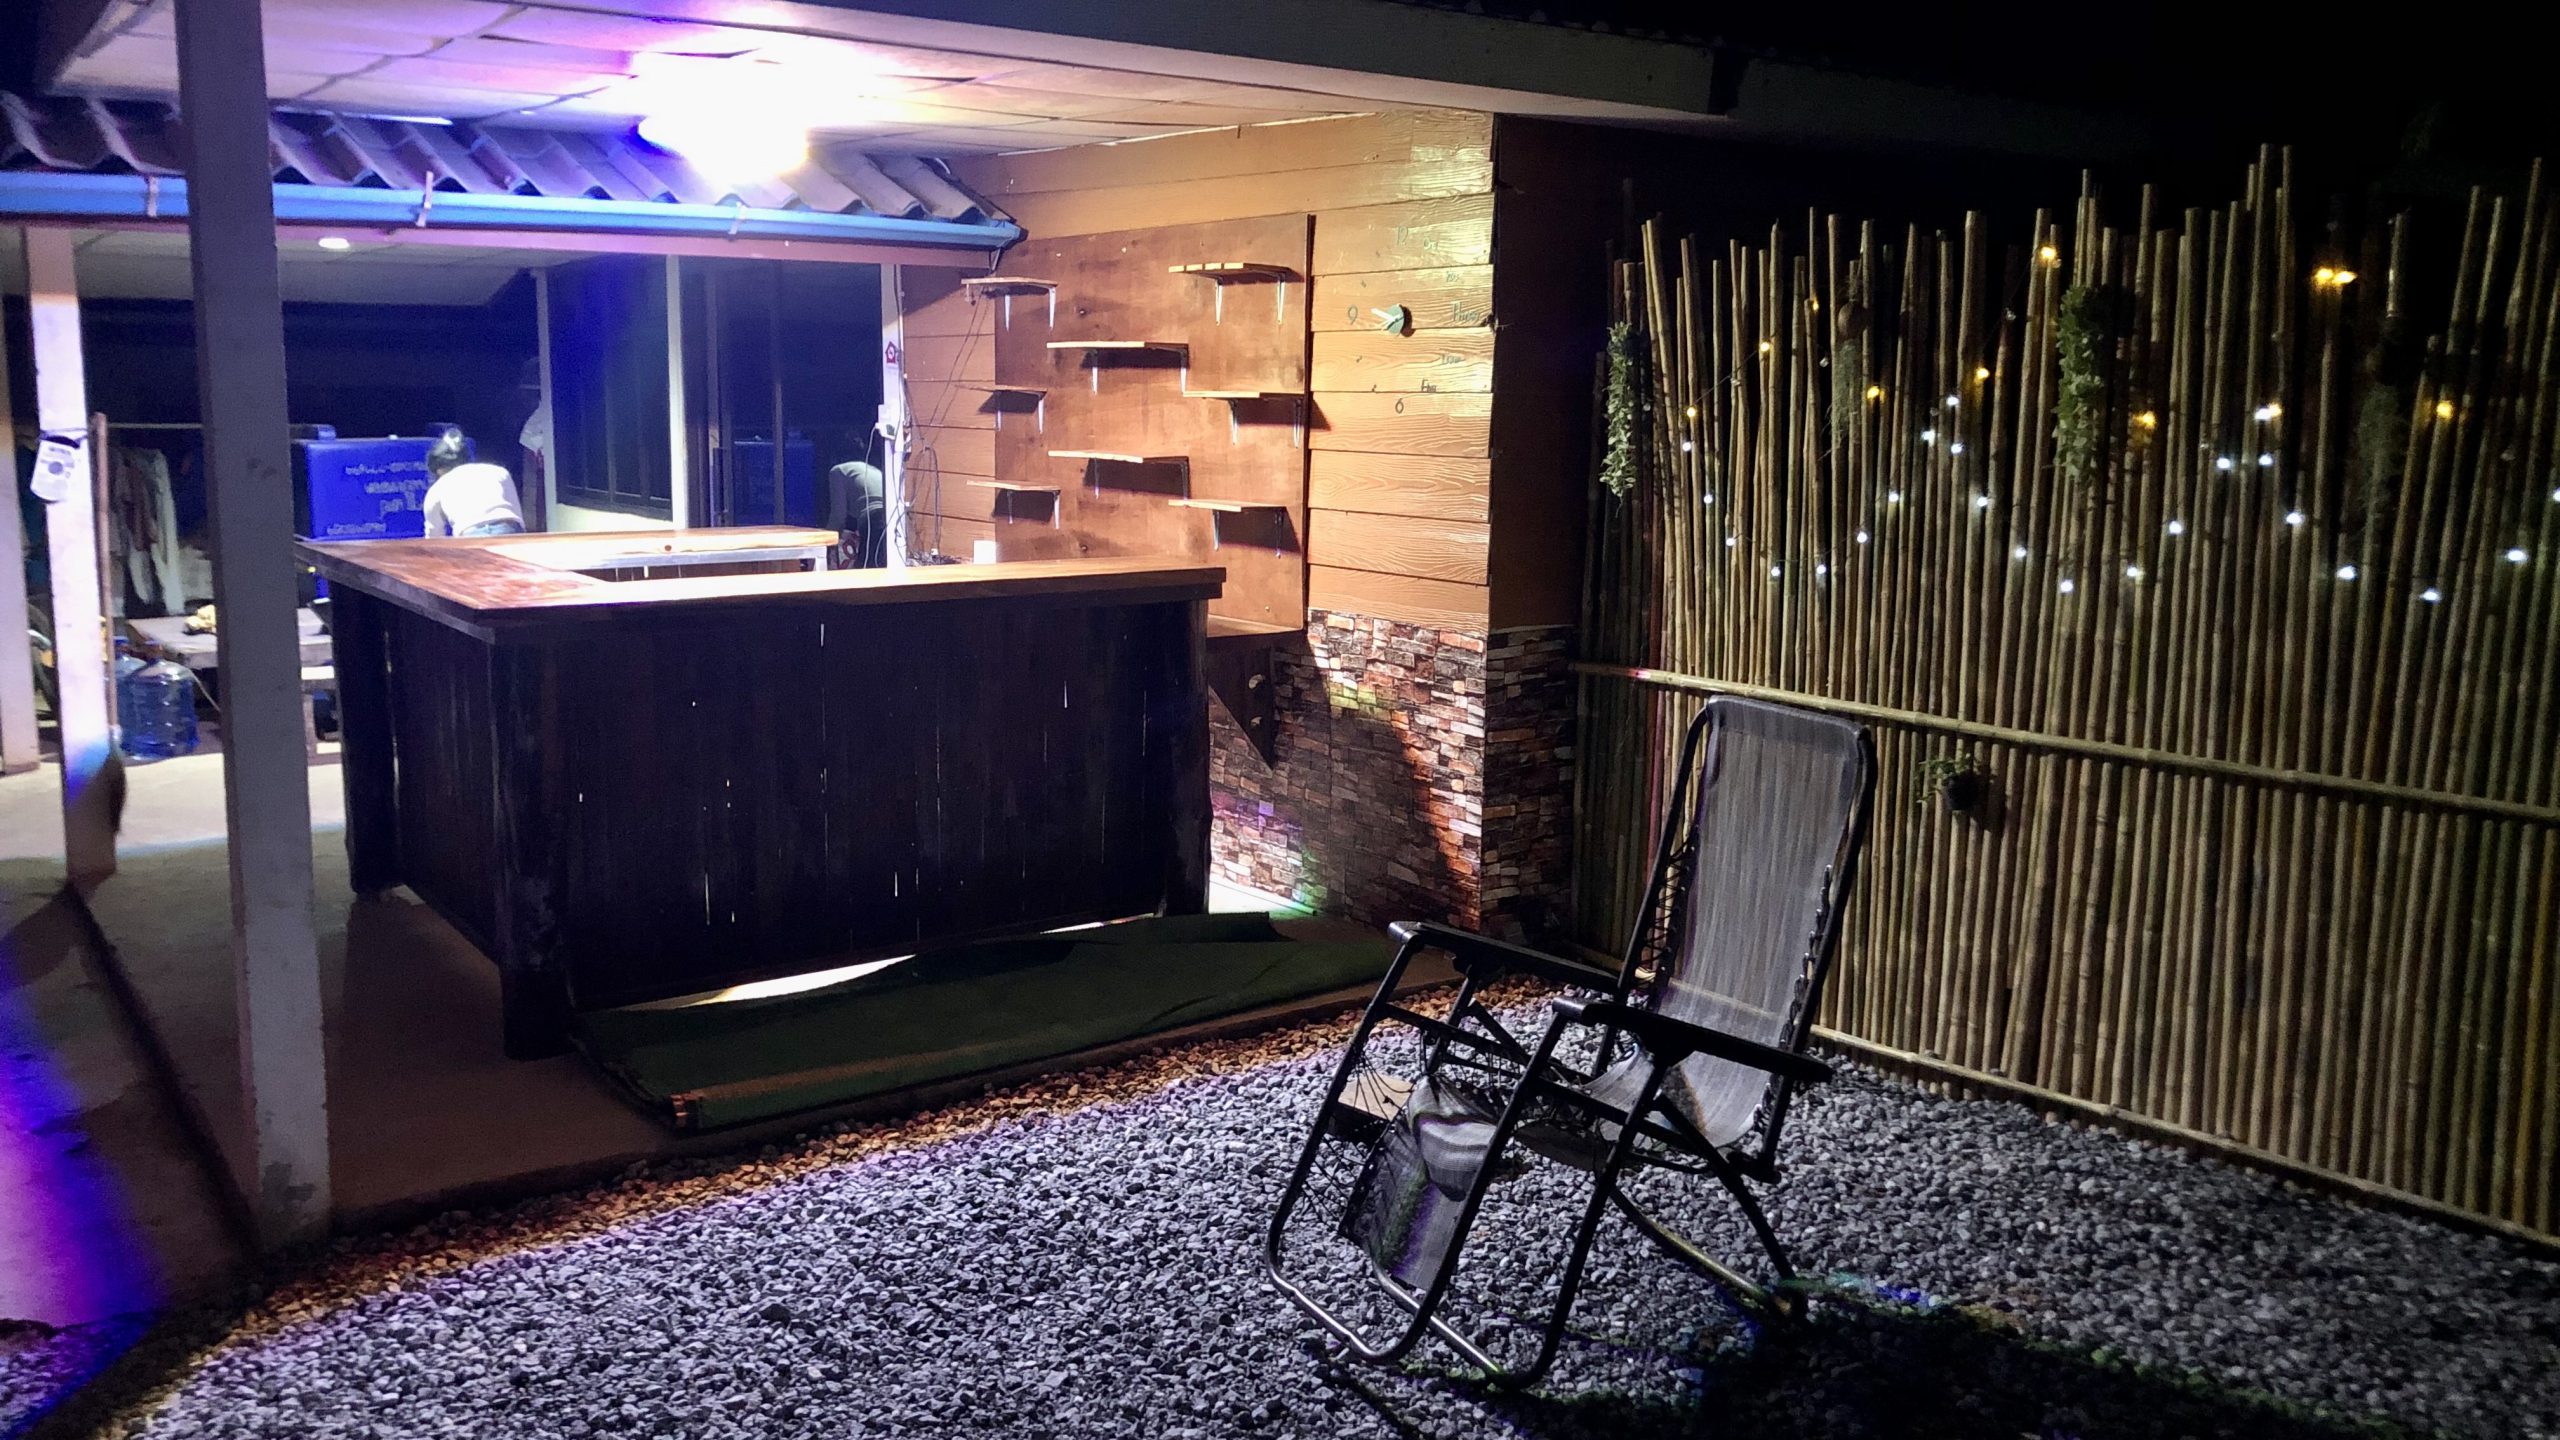 We have gray stones now on the outdoor area and some led lights at the bamboo fence